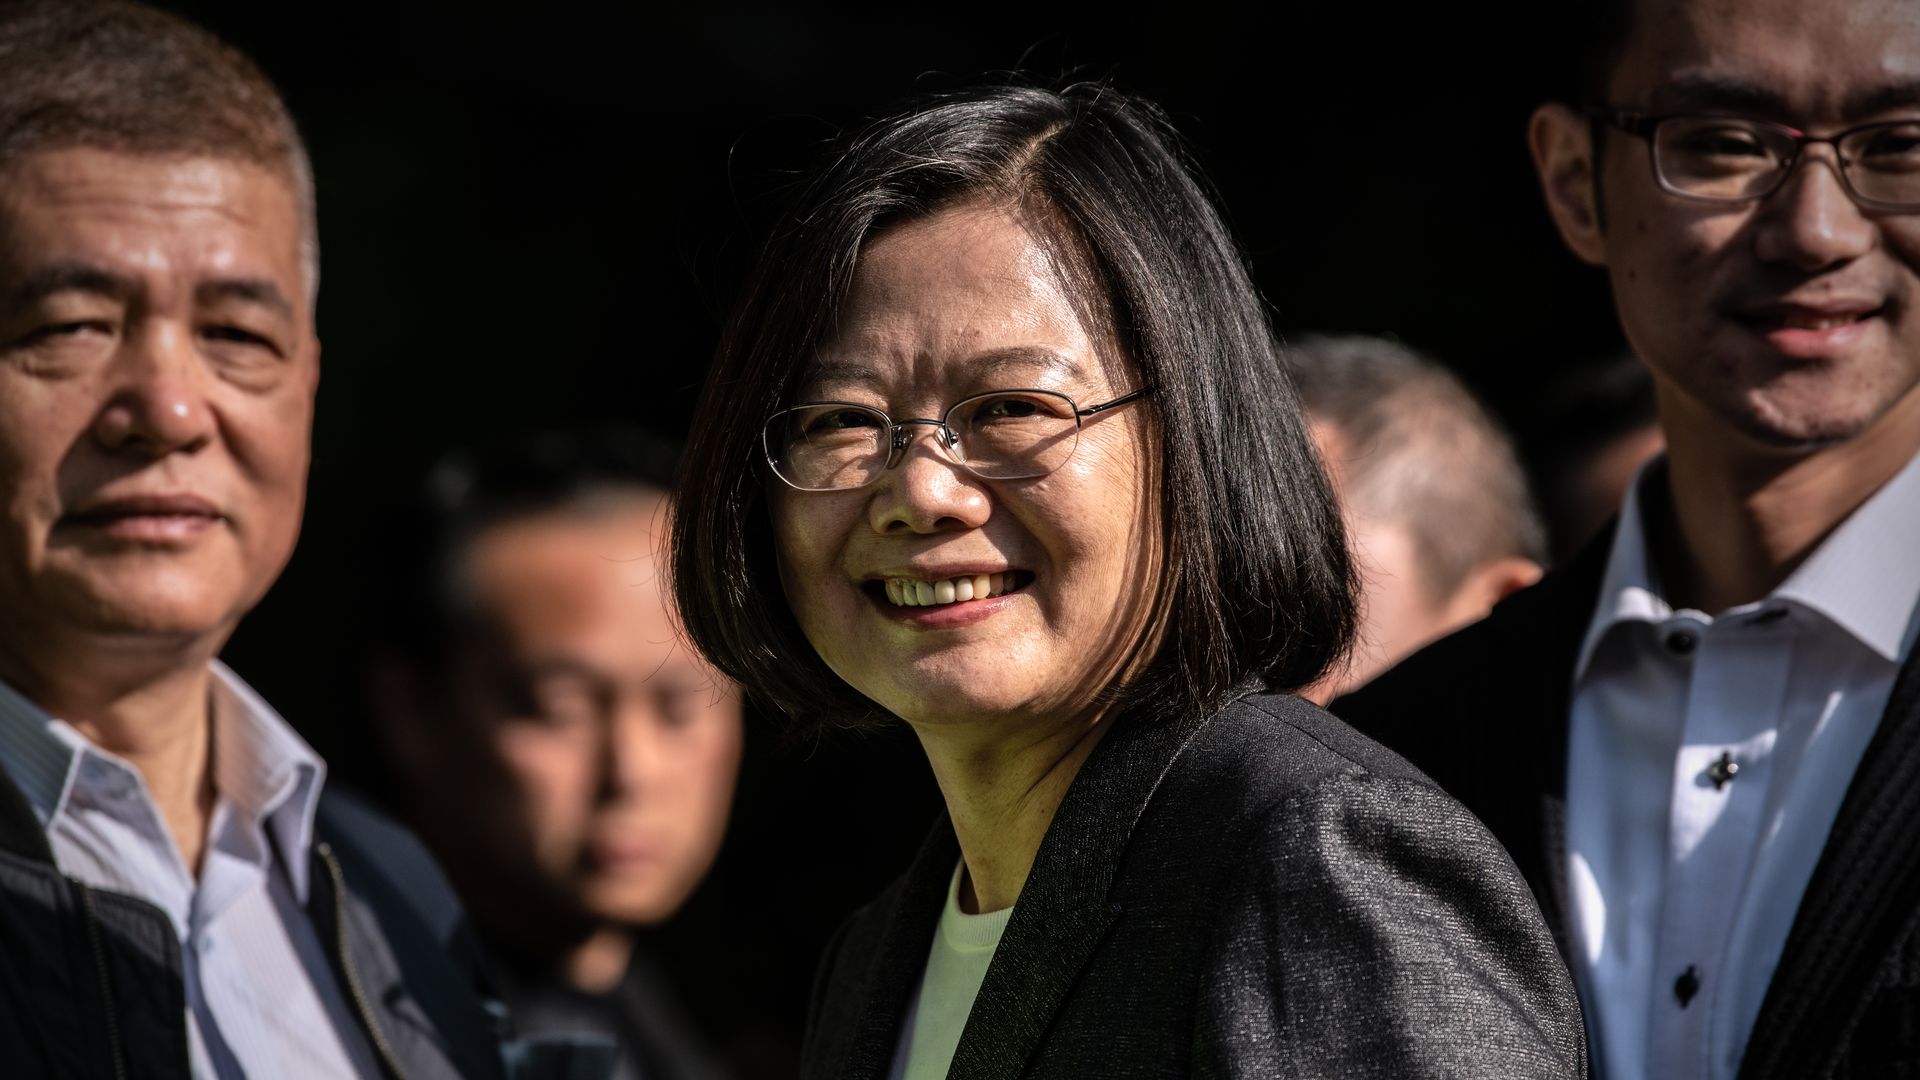 Taiwans President Tsai Ing-wen smiles as she leaves after casting her vote in the presidential election on January 11, 2020 in Taipei, Taiwan